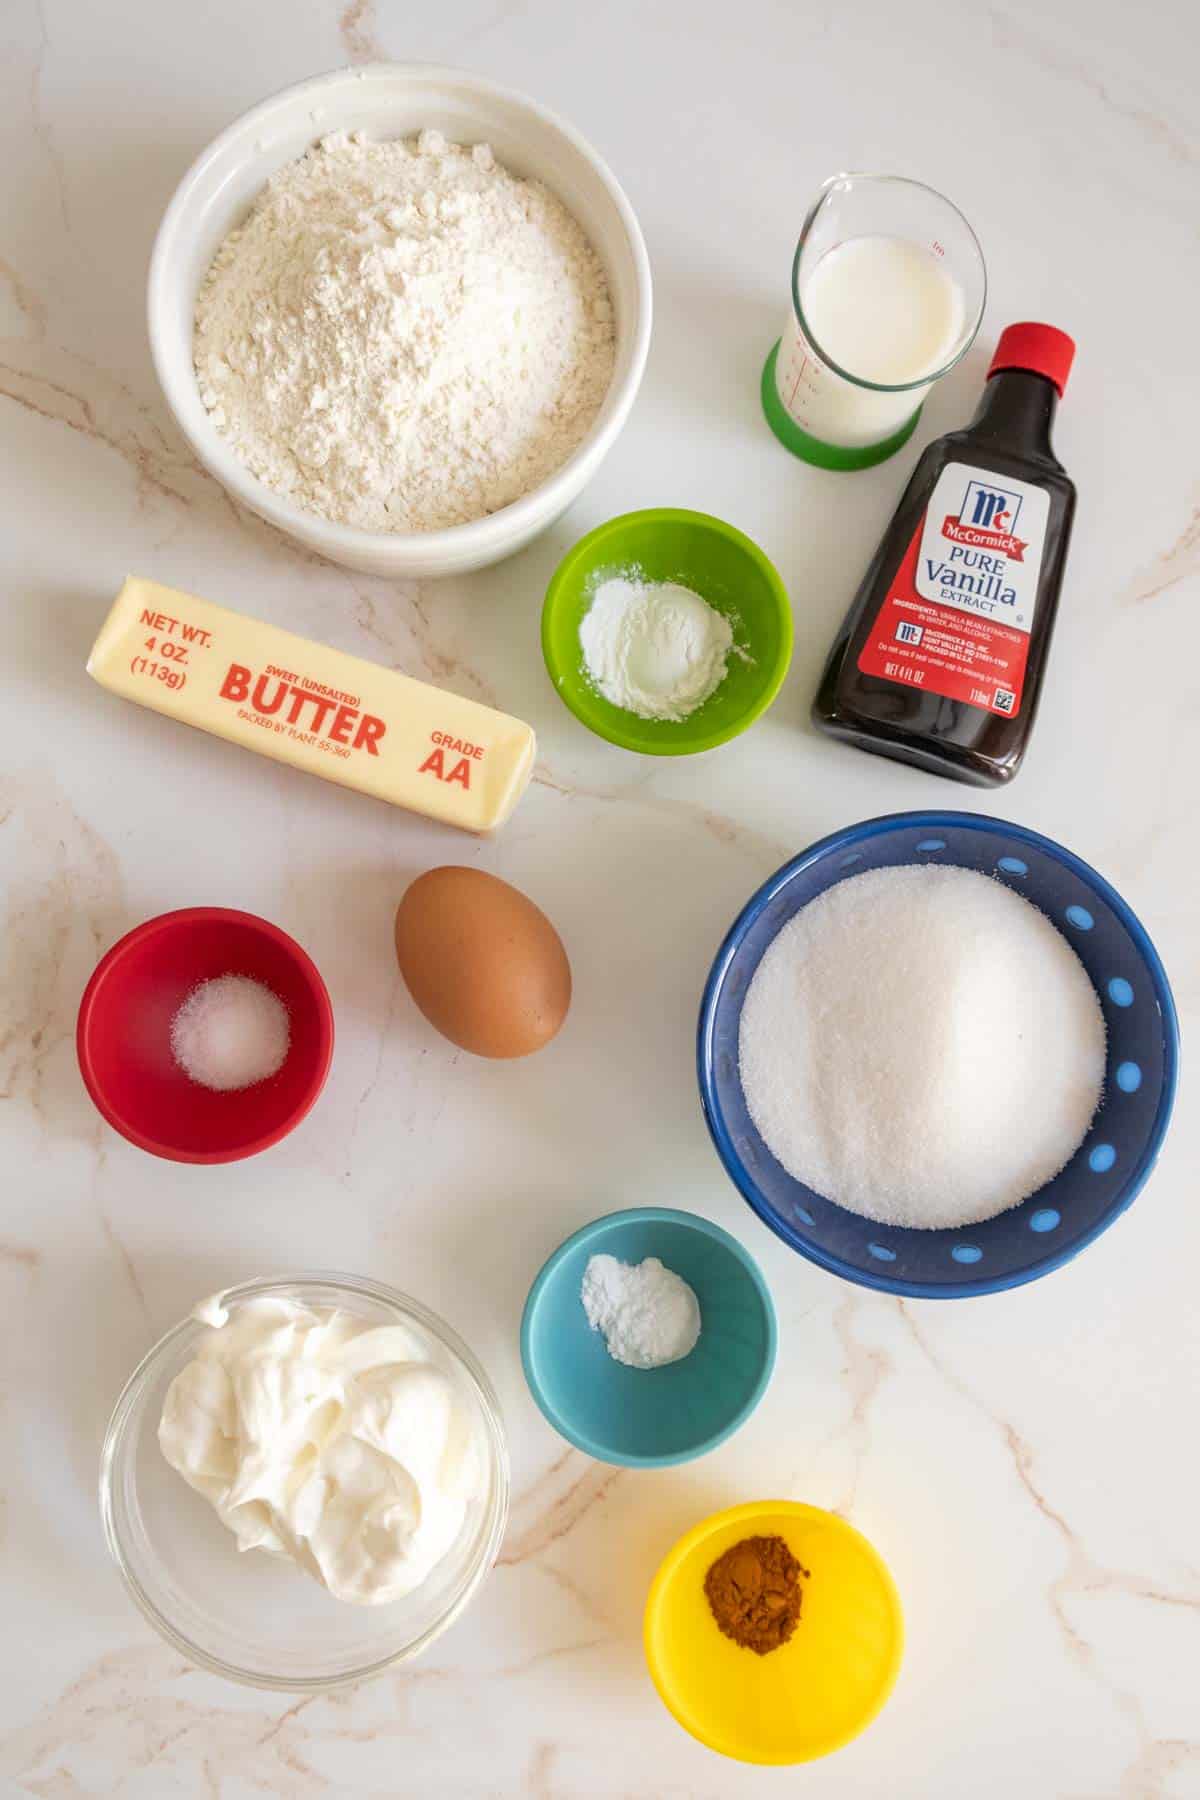 The ingredients for a muffin recipe are laid out on a table.